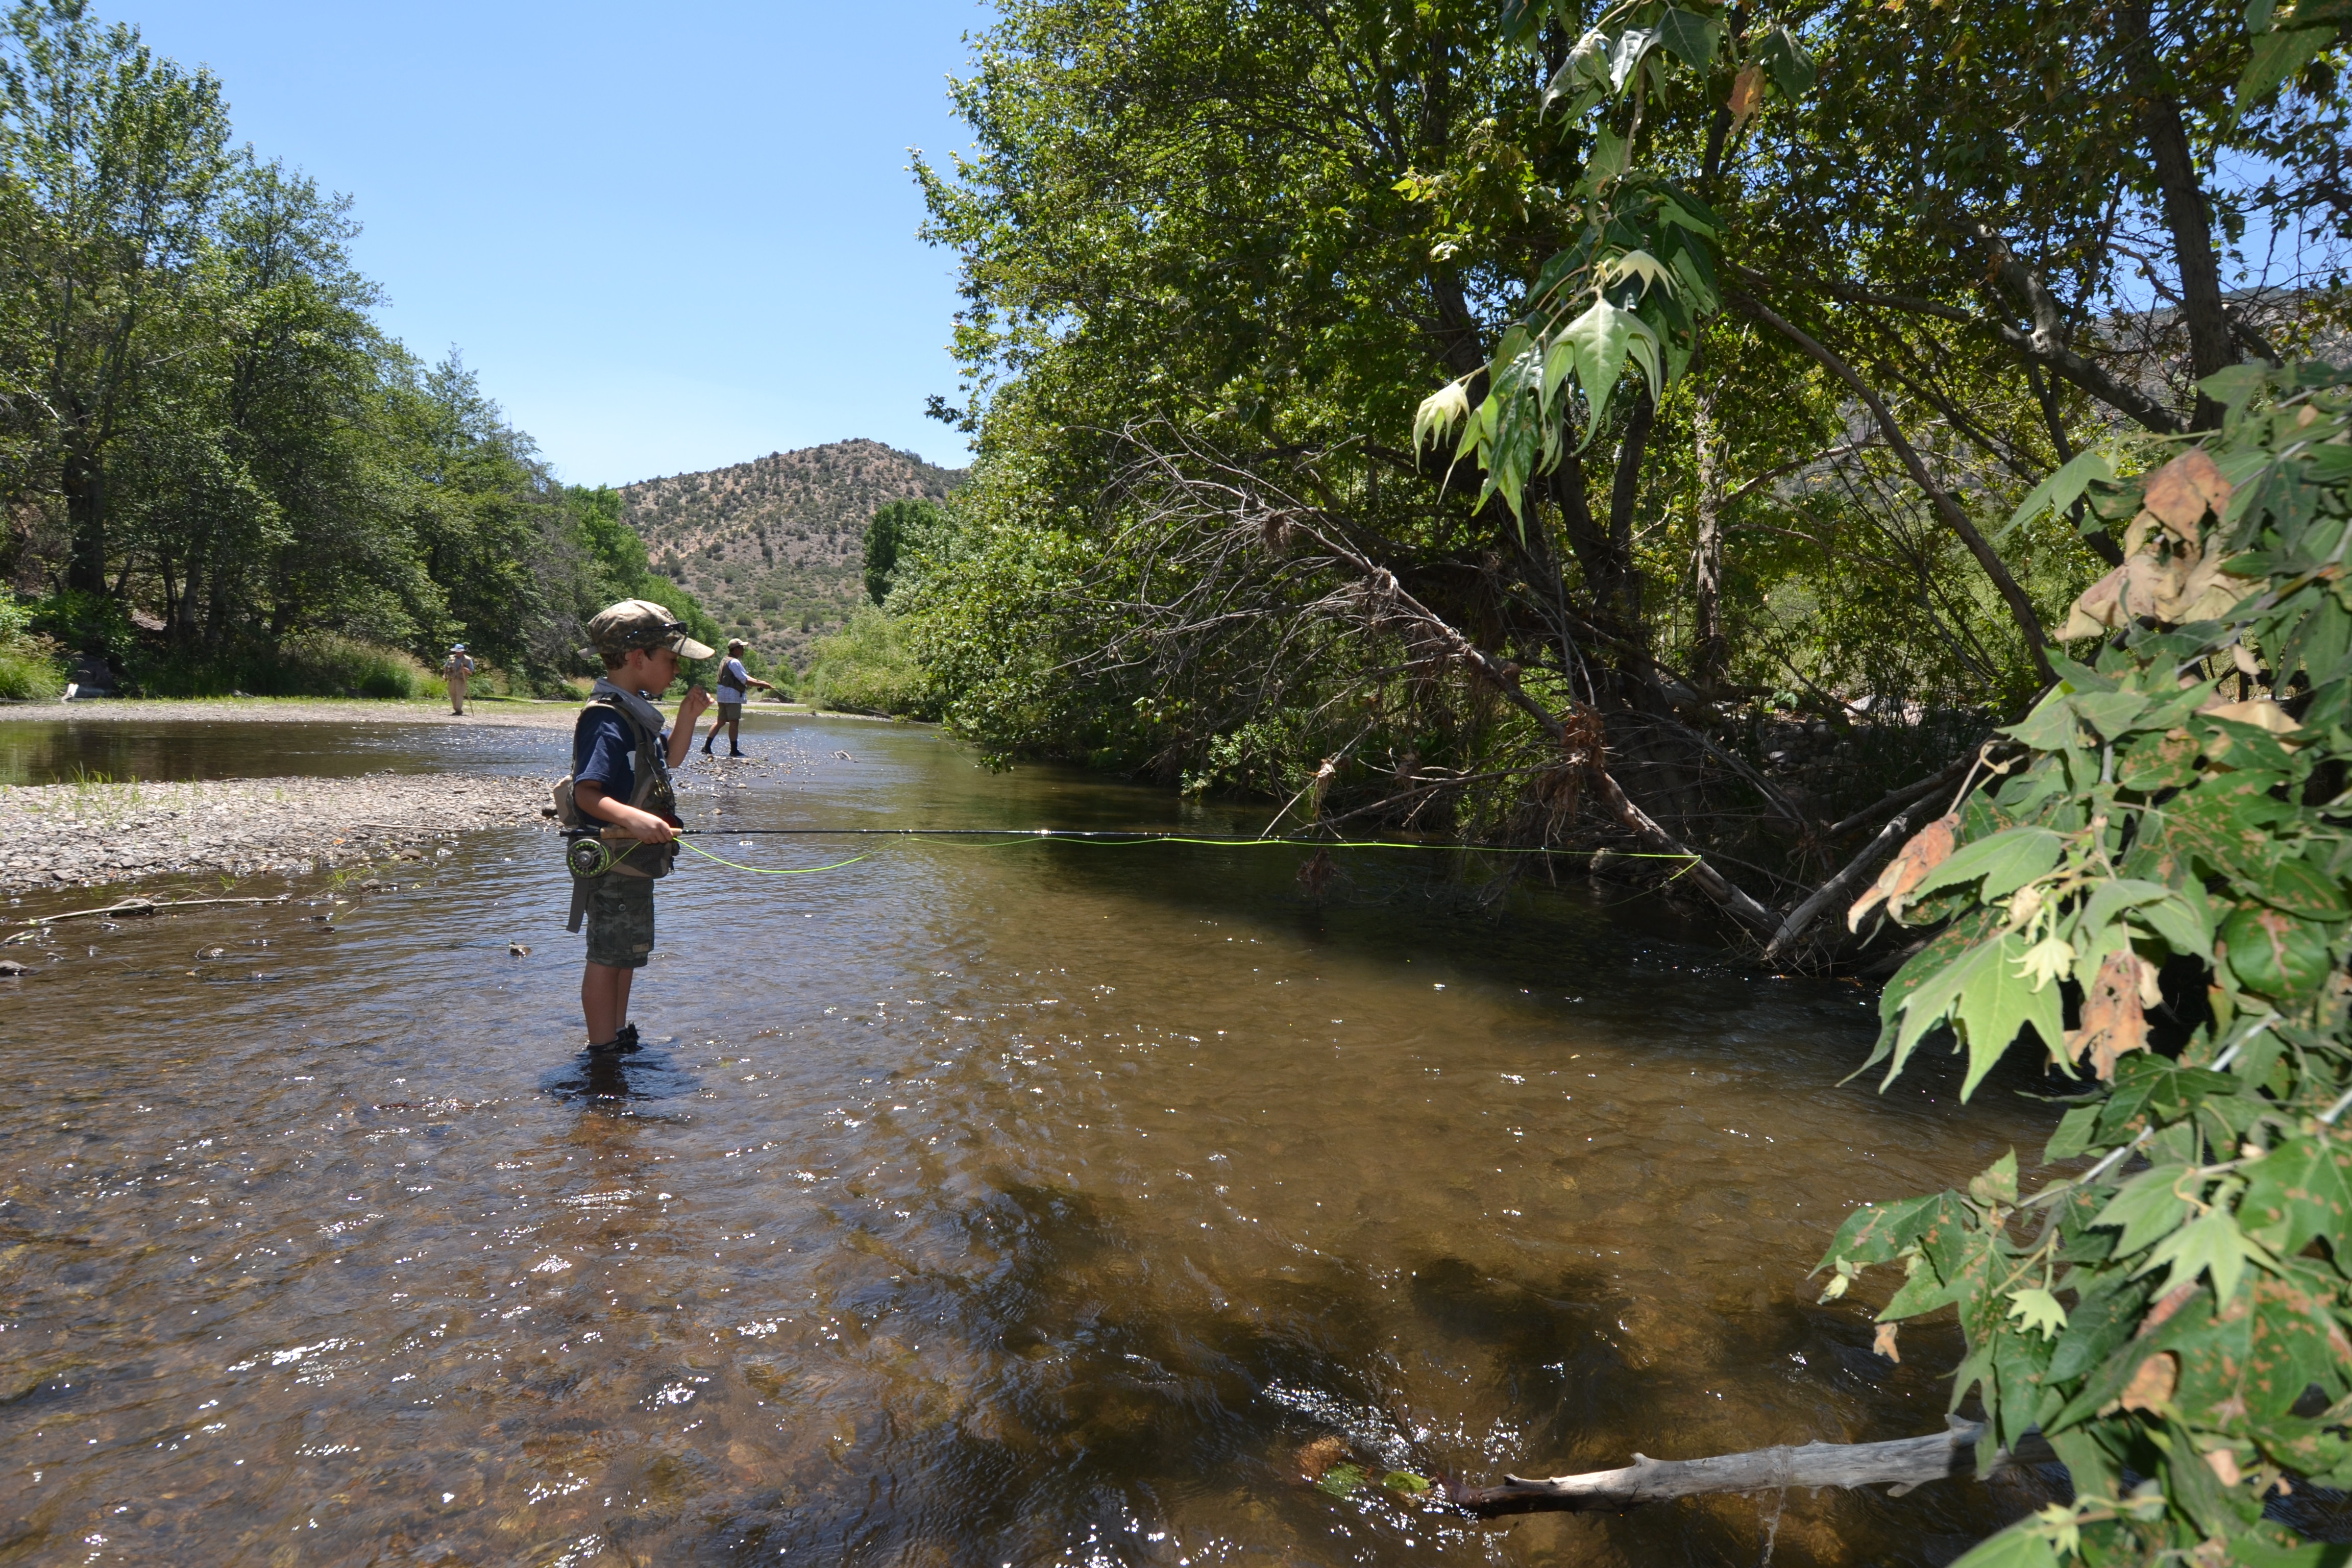 2019's Endangered River report features Gila River